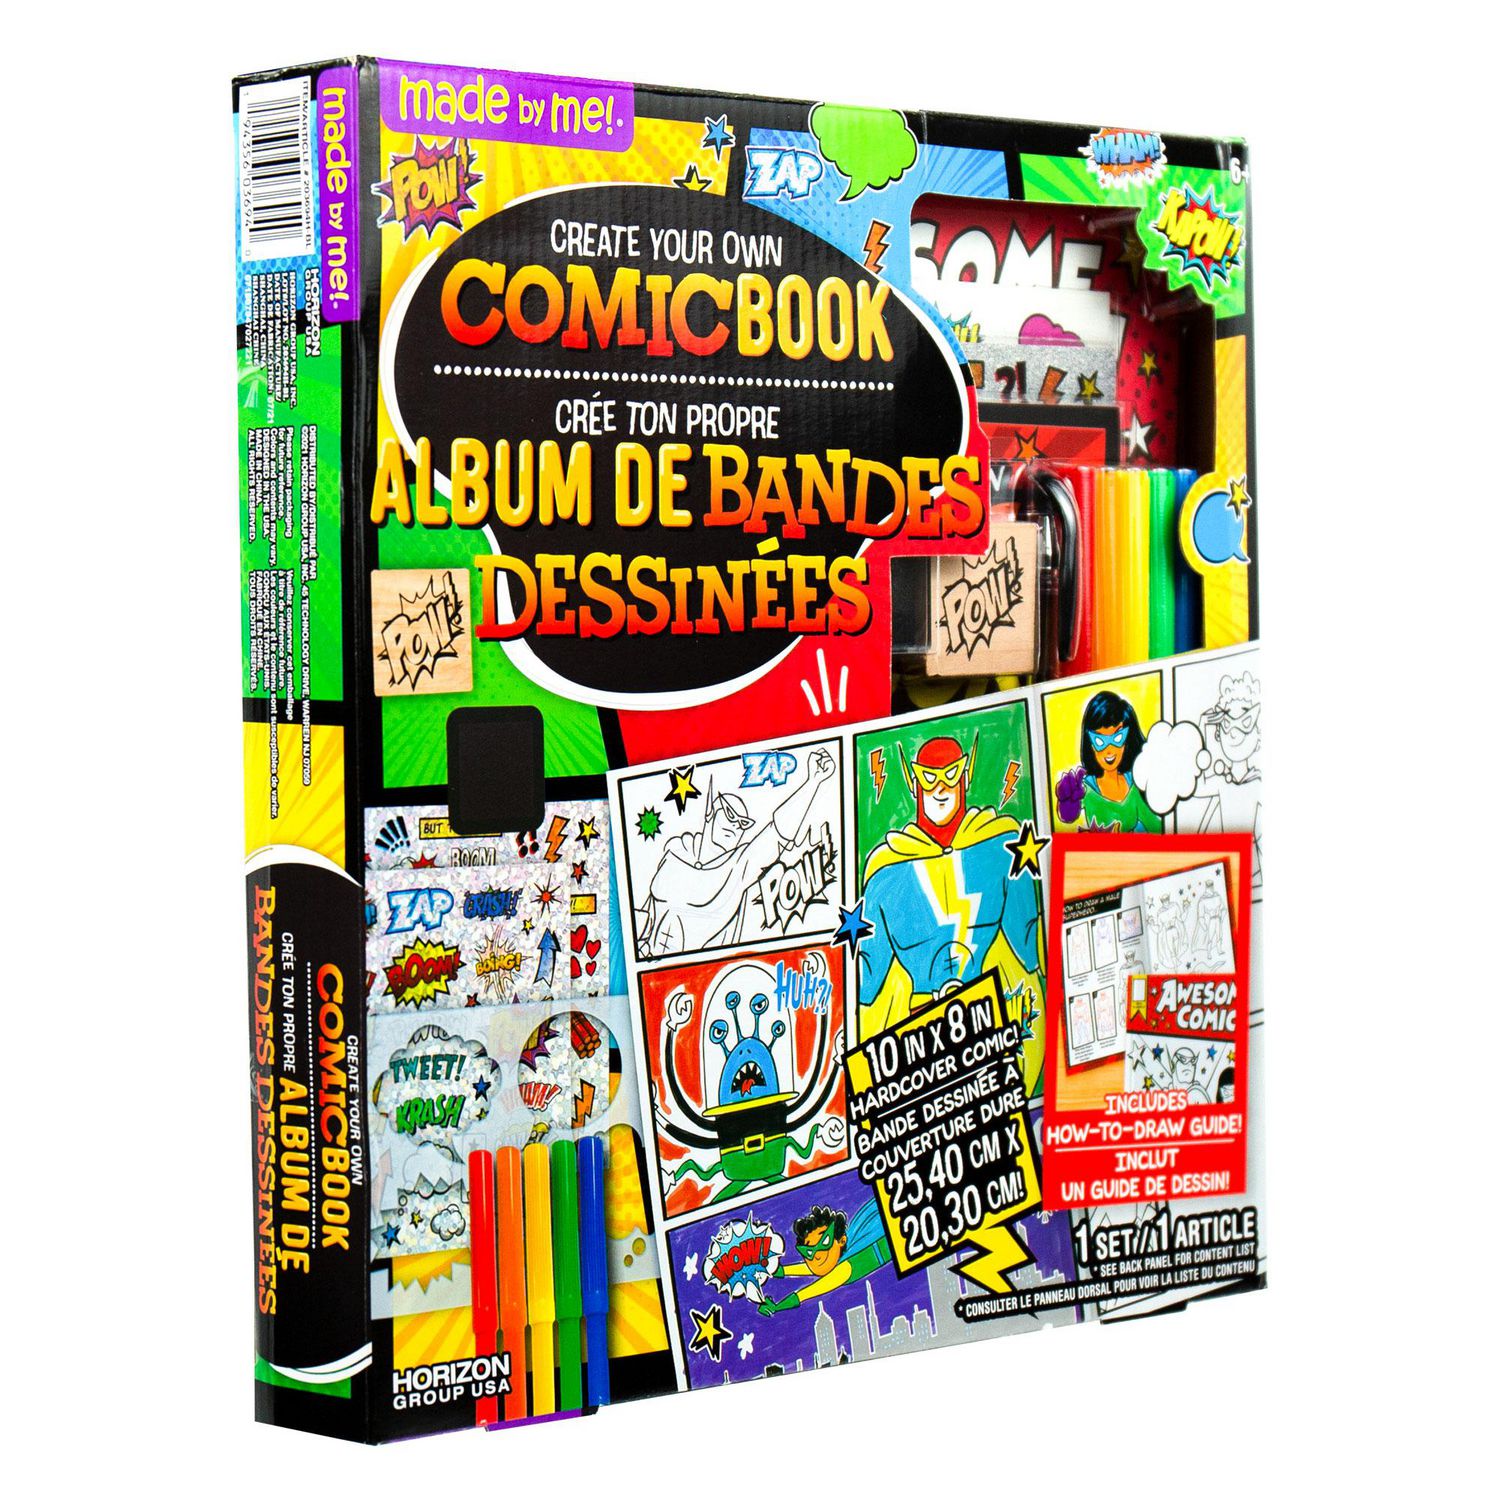  Made By Me Make Your Own Comic Book Storytelling Kit